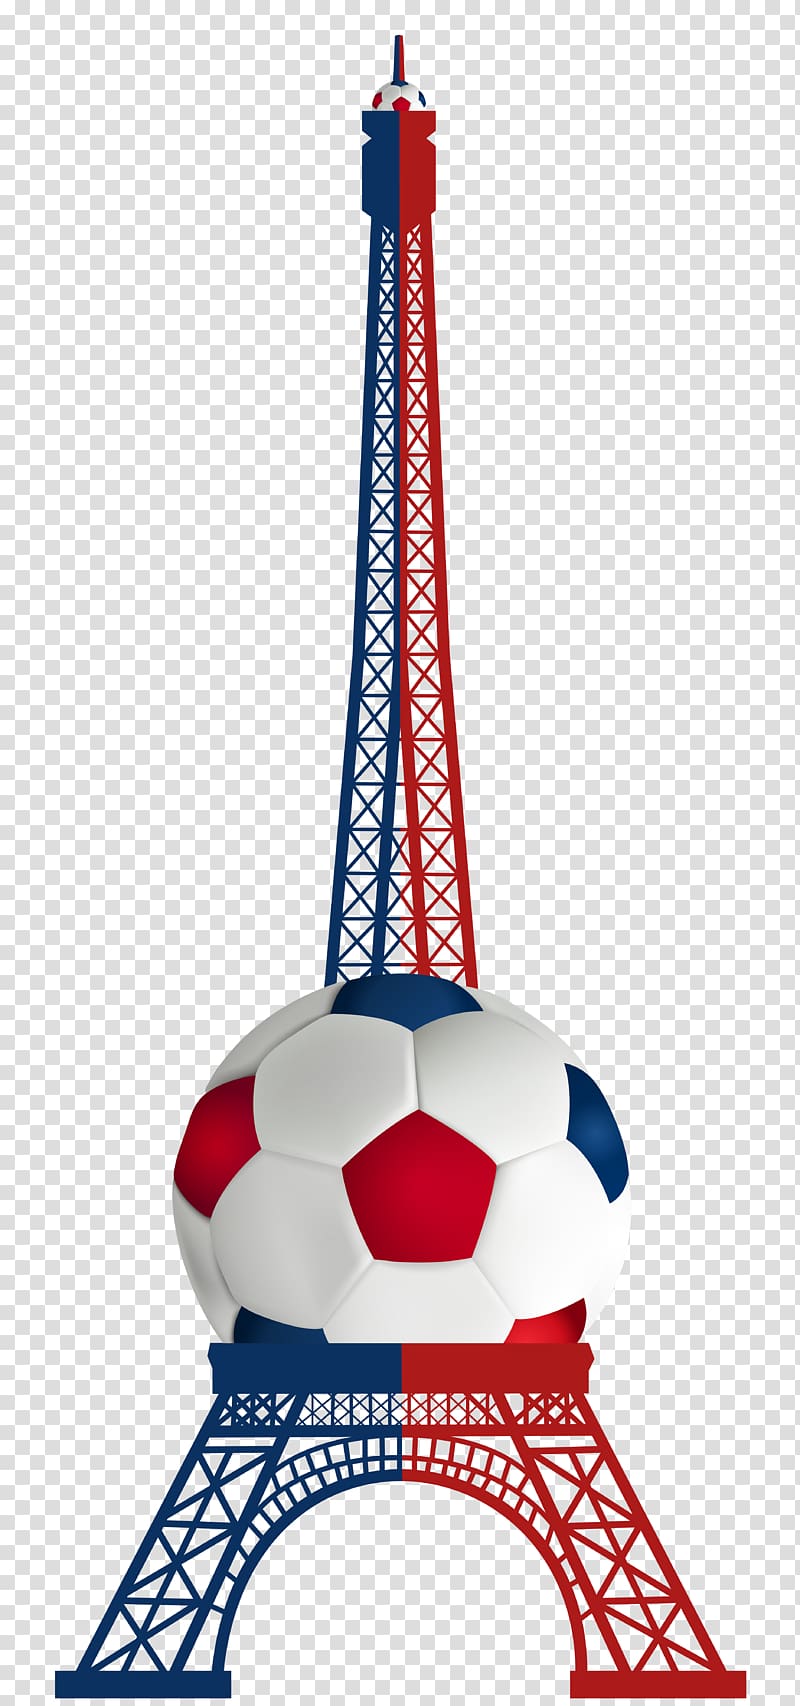 red and blue tower illustration, Eiffel Tower Drawing Sketch, Eiffel Tower Euro 2016 France transparent background PNG clipart